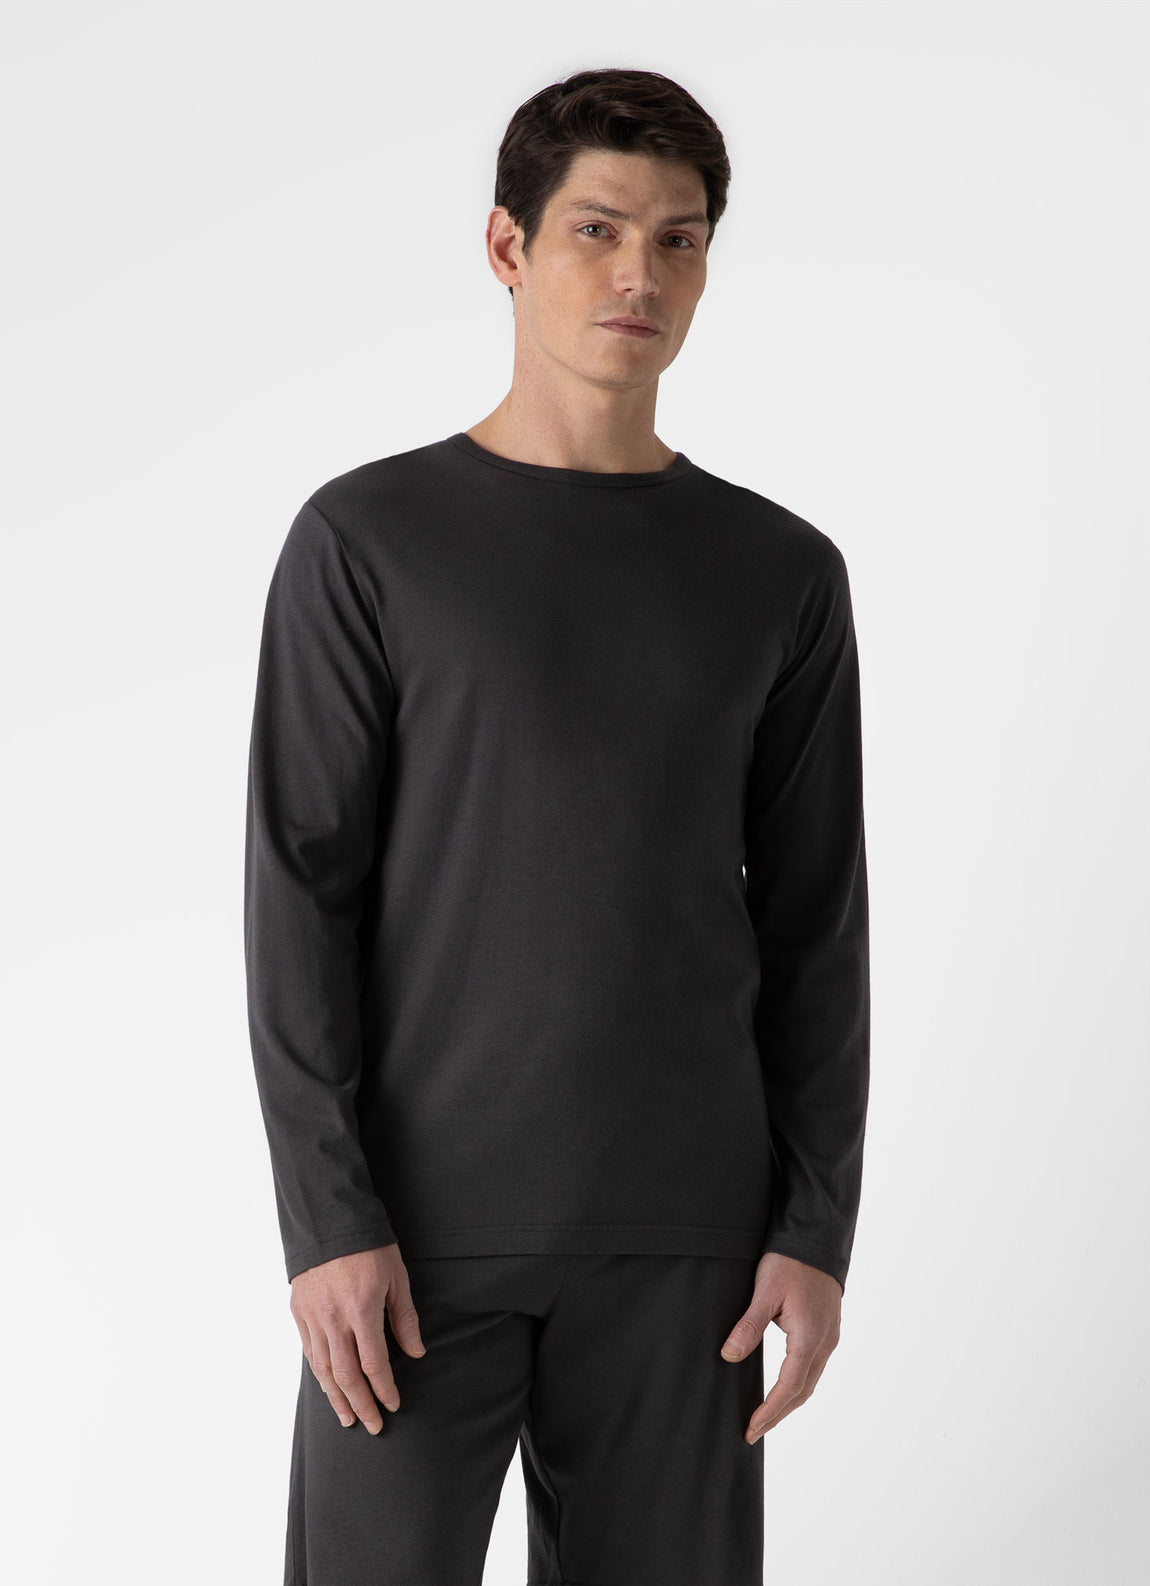 See Through Nightwear for Men. Men's Black Mesh Party and Lounging